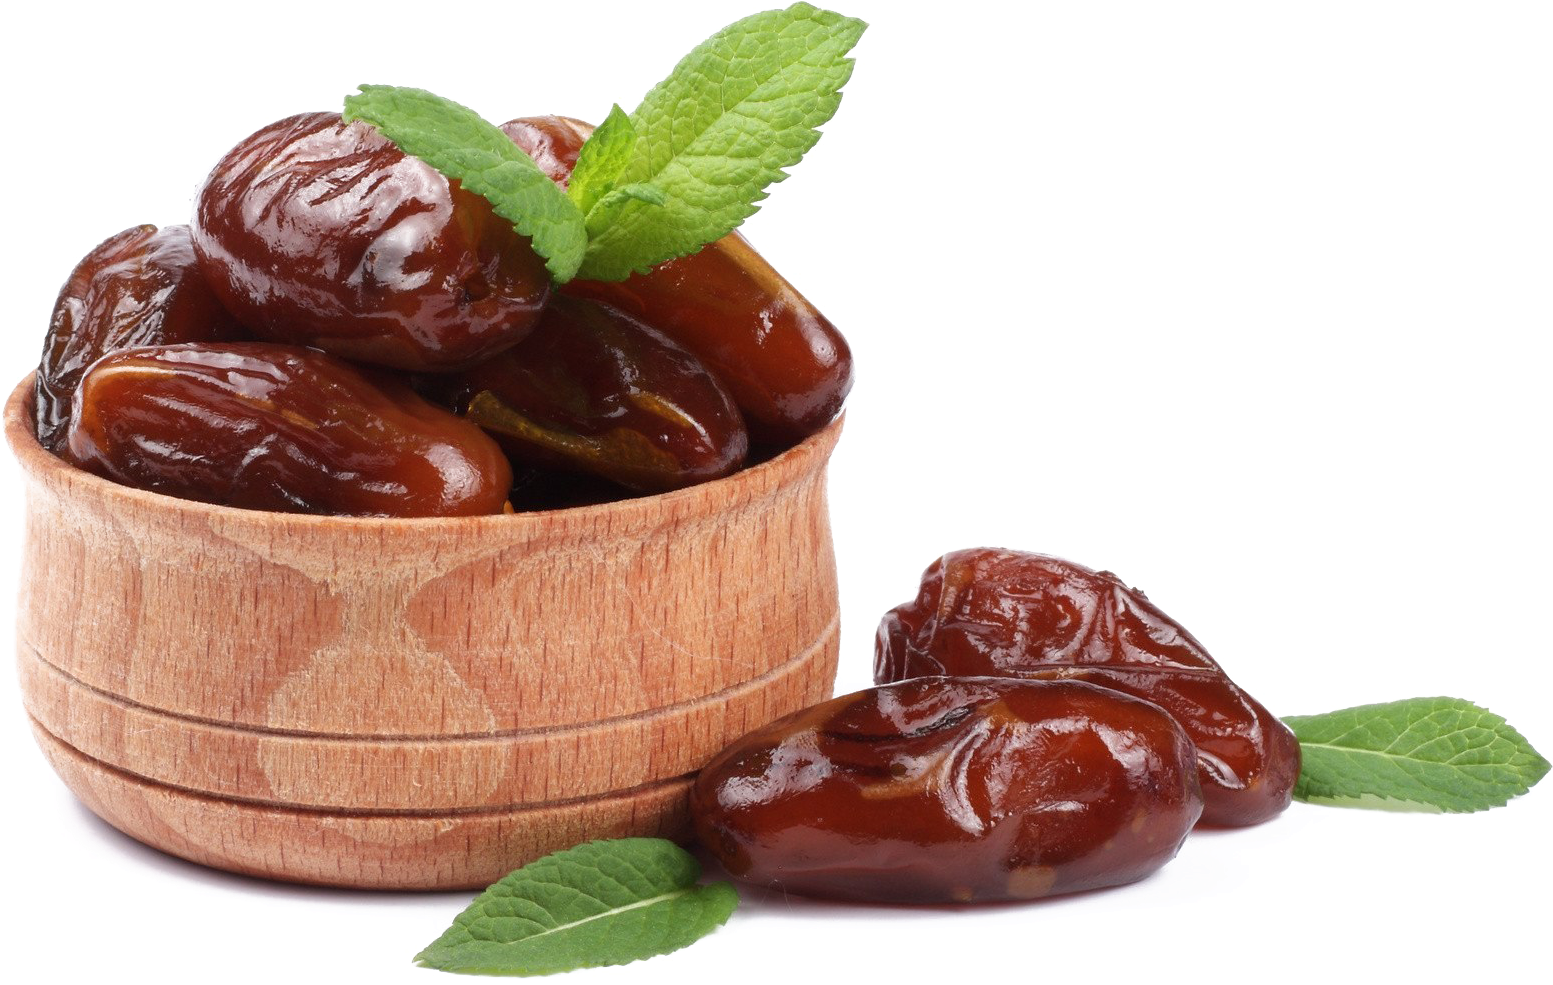 A Bowl Of Dates With Leaves